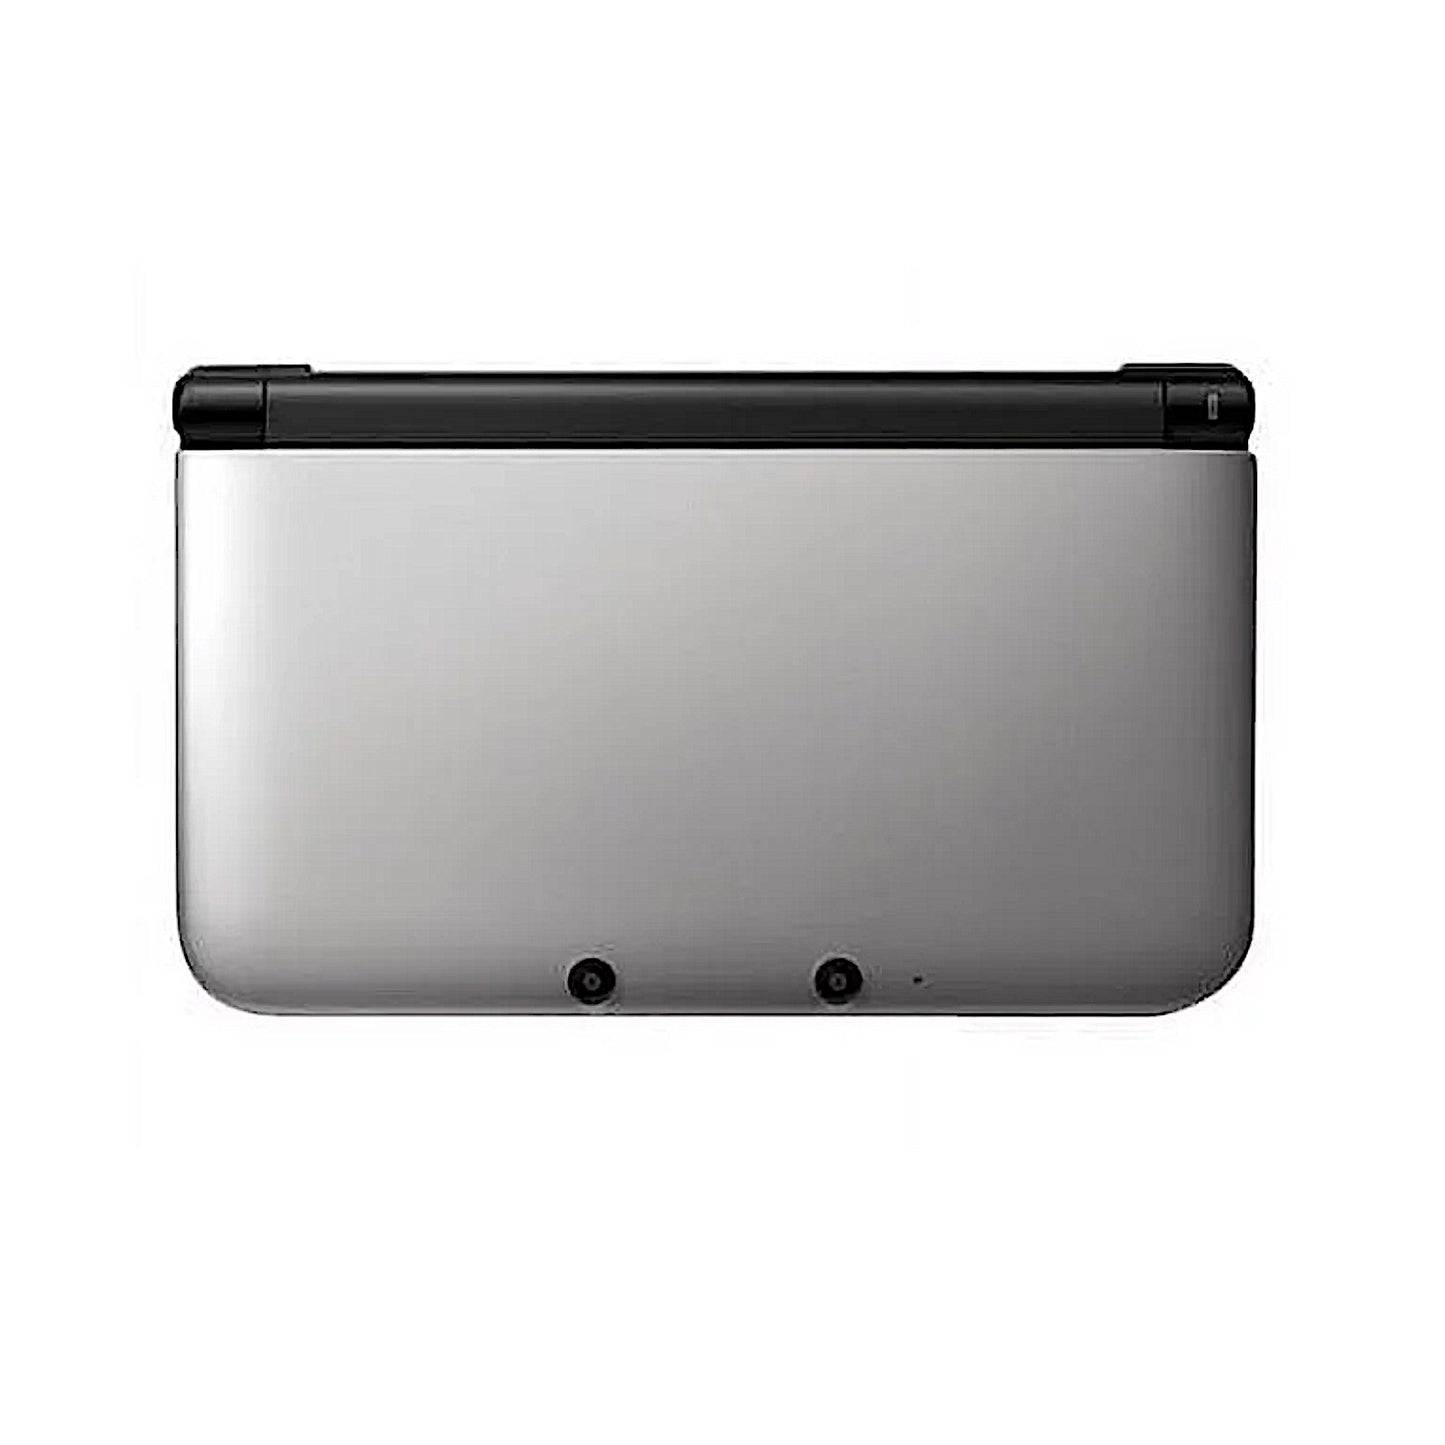 Nintendo 3DS XL - Handheld Game Console - Silver (PAL) - (USED)